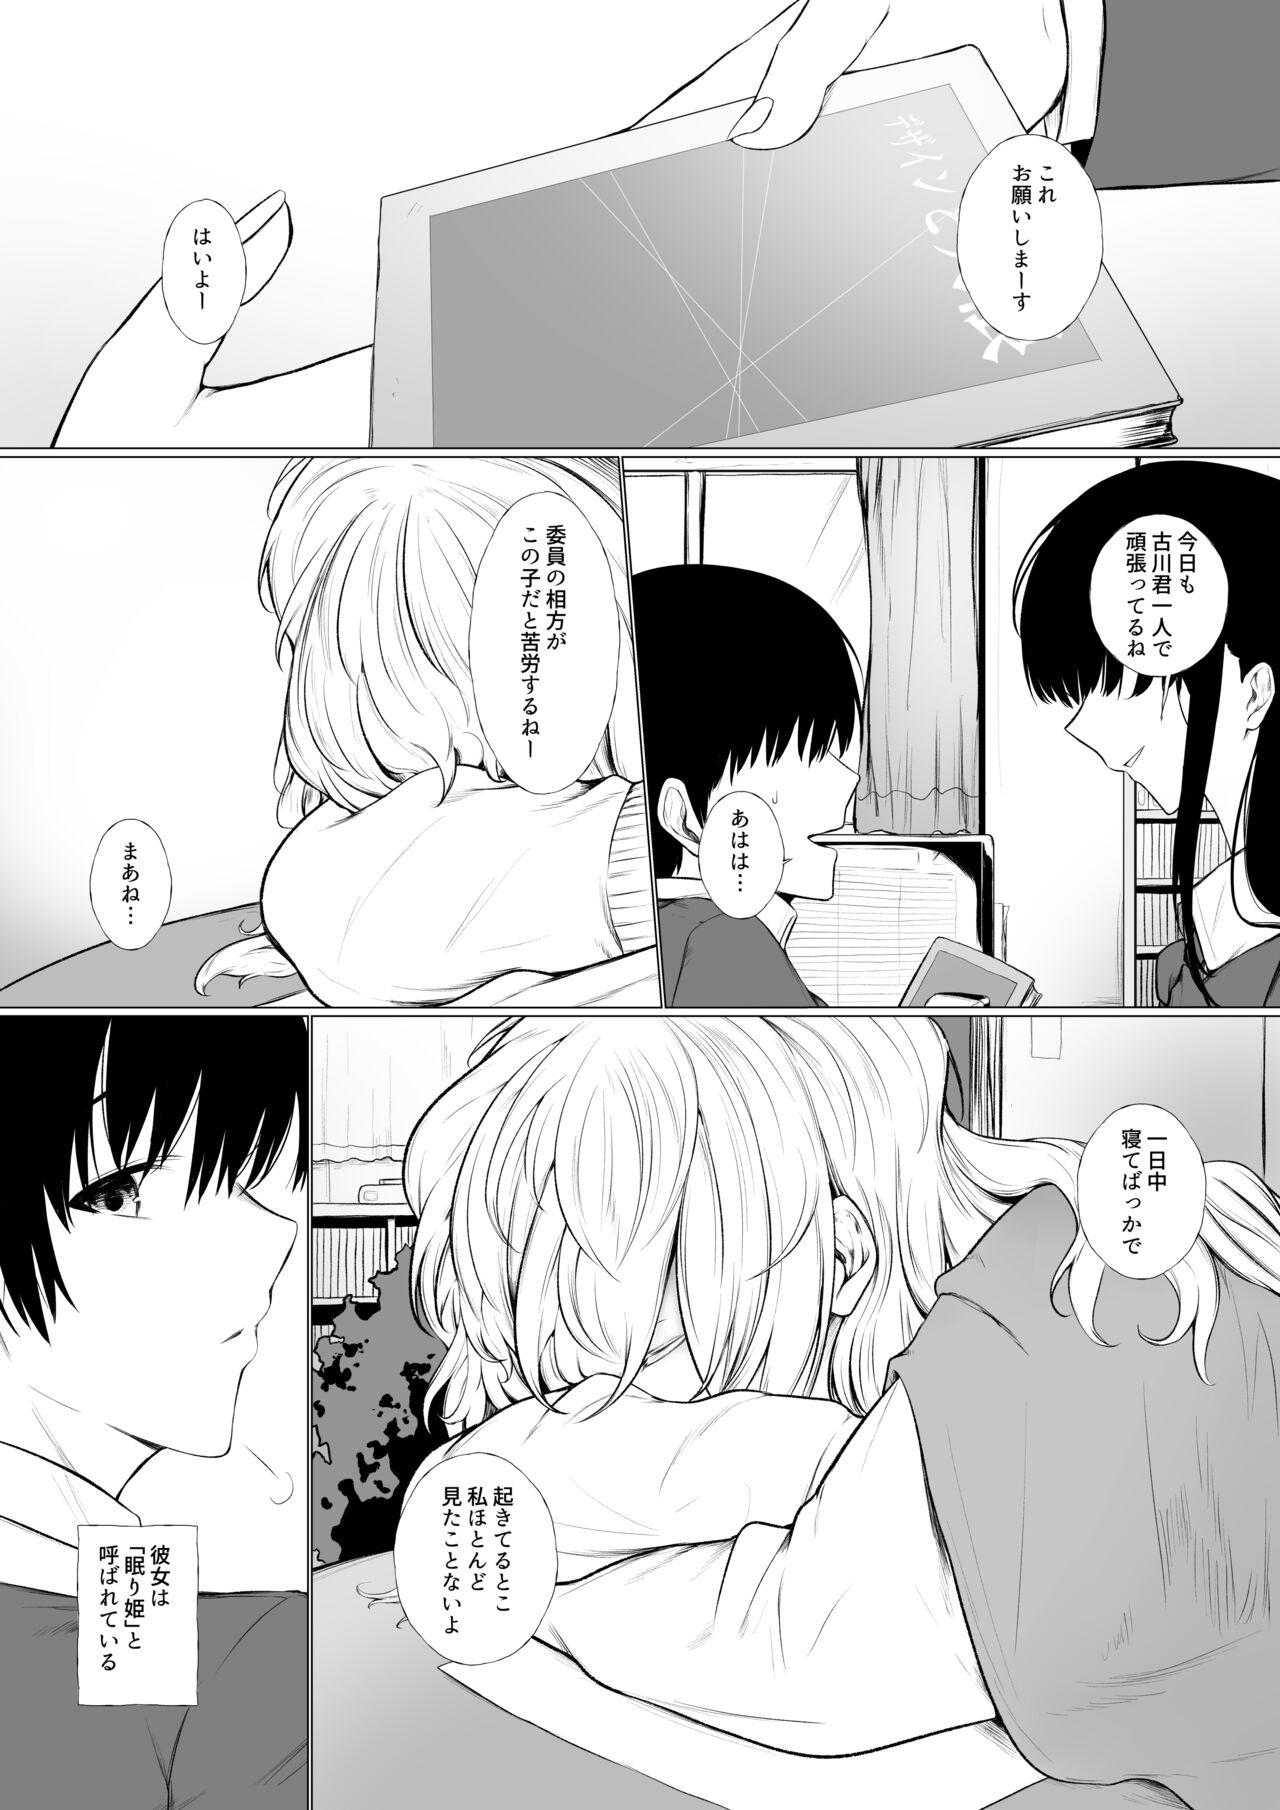 Cheating 眠り姫と図書室で - Original Gay Brownhair - Page 2